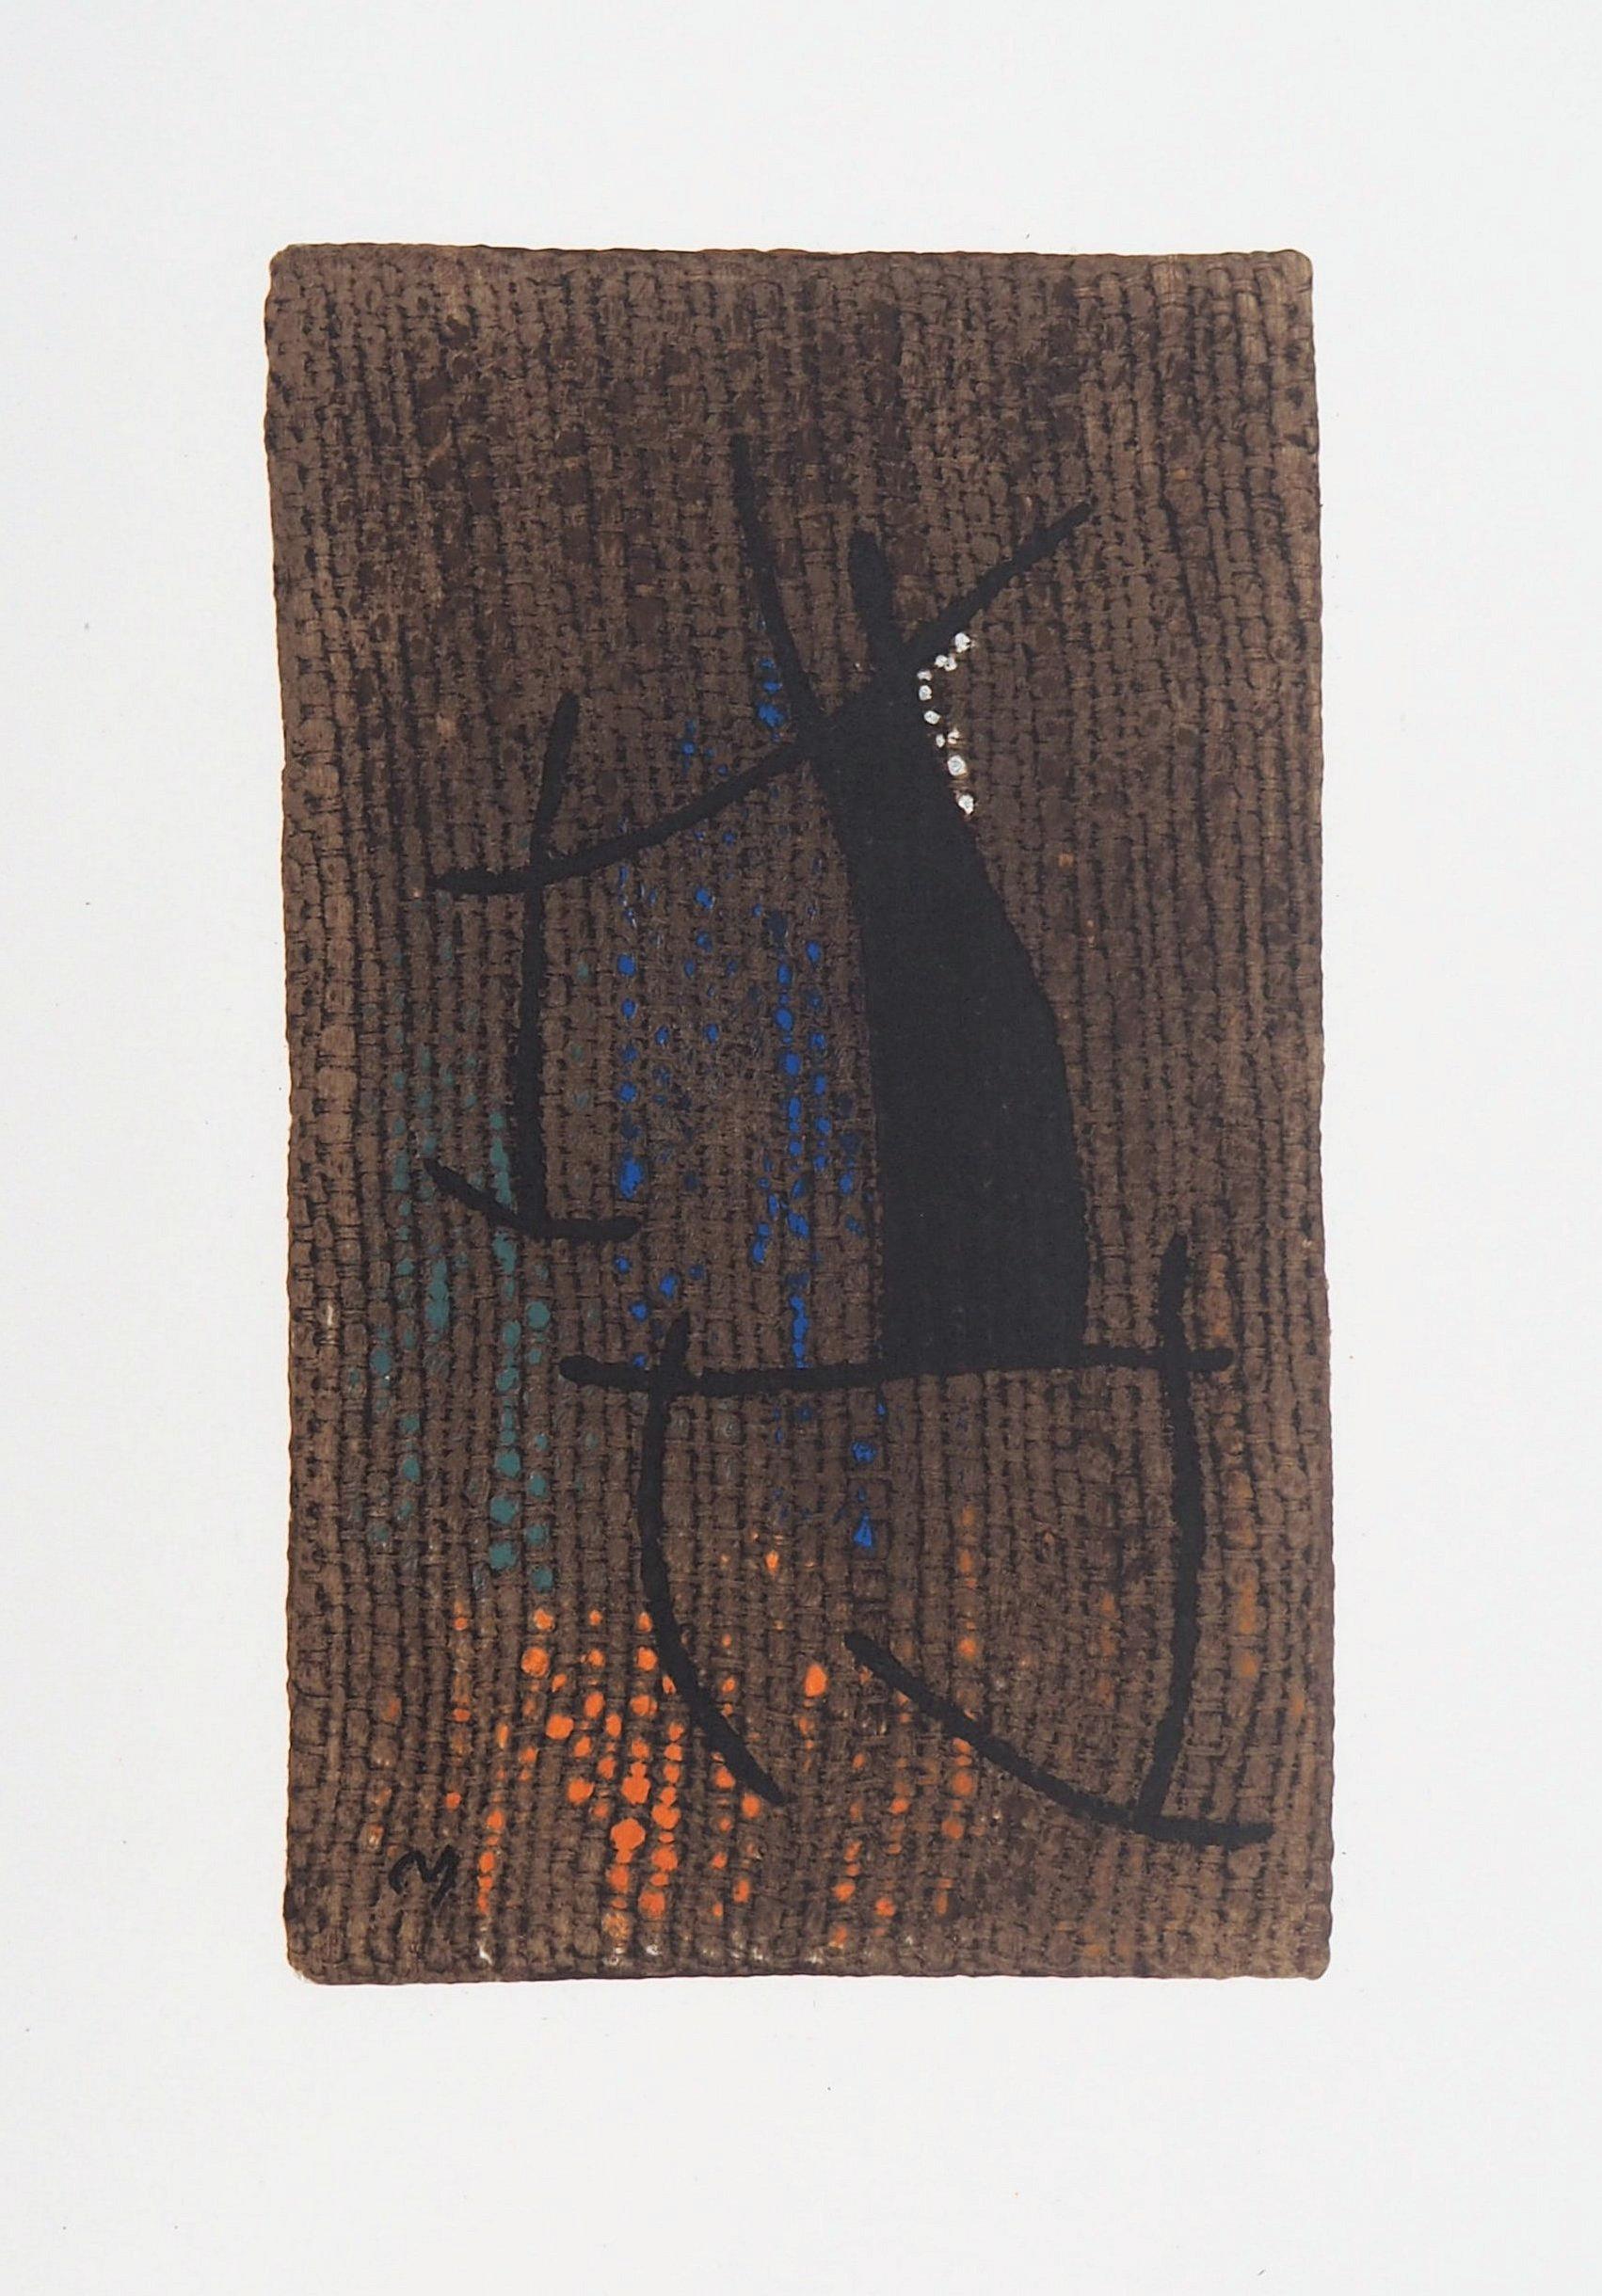 Joan MIRO
Woman on Brown Background 

Lithograph (printed in Maeght / Arte workshop)
Printed signature in the plate
On light vellum 55 x 46 cm (c. 22 x 18 in)
Authenticated by the blind stamp of the editor in the lower left corner

REFERENCES : From